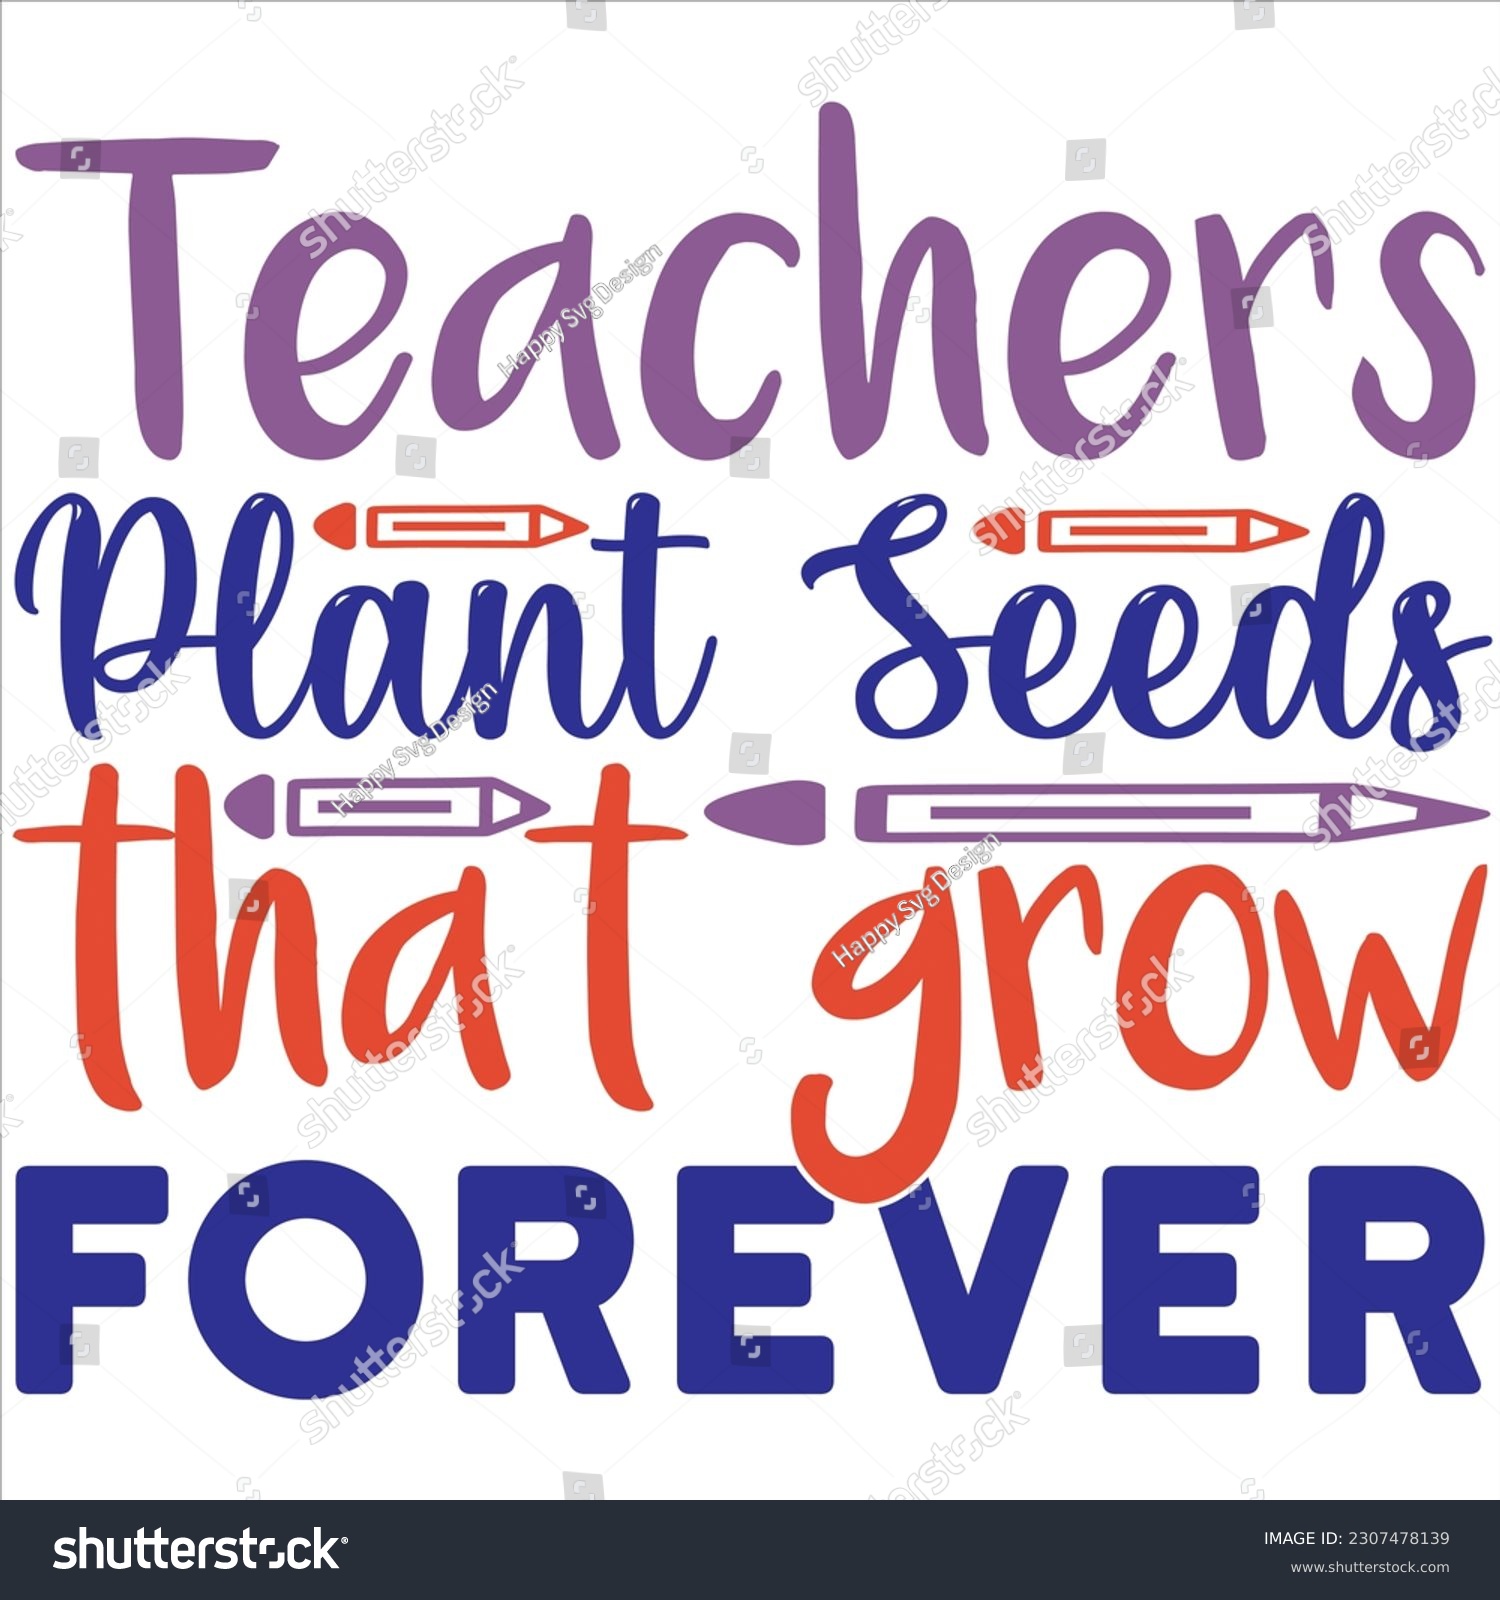 SVG of Teachers plant seeds that grow forever, Svg t-shirt design and vector file. svg